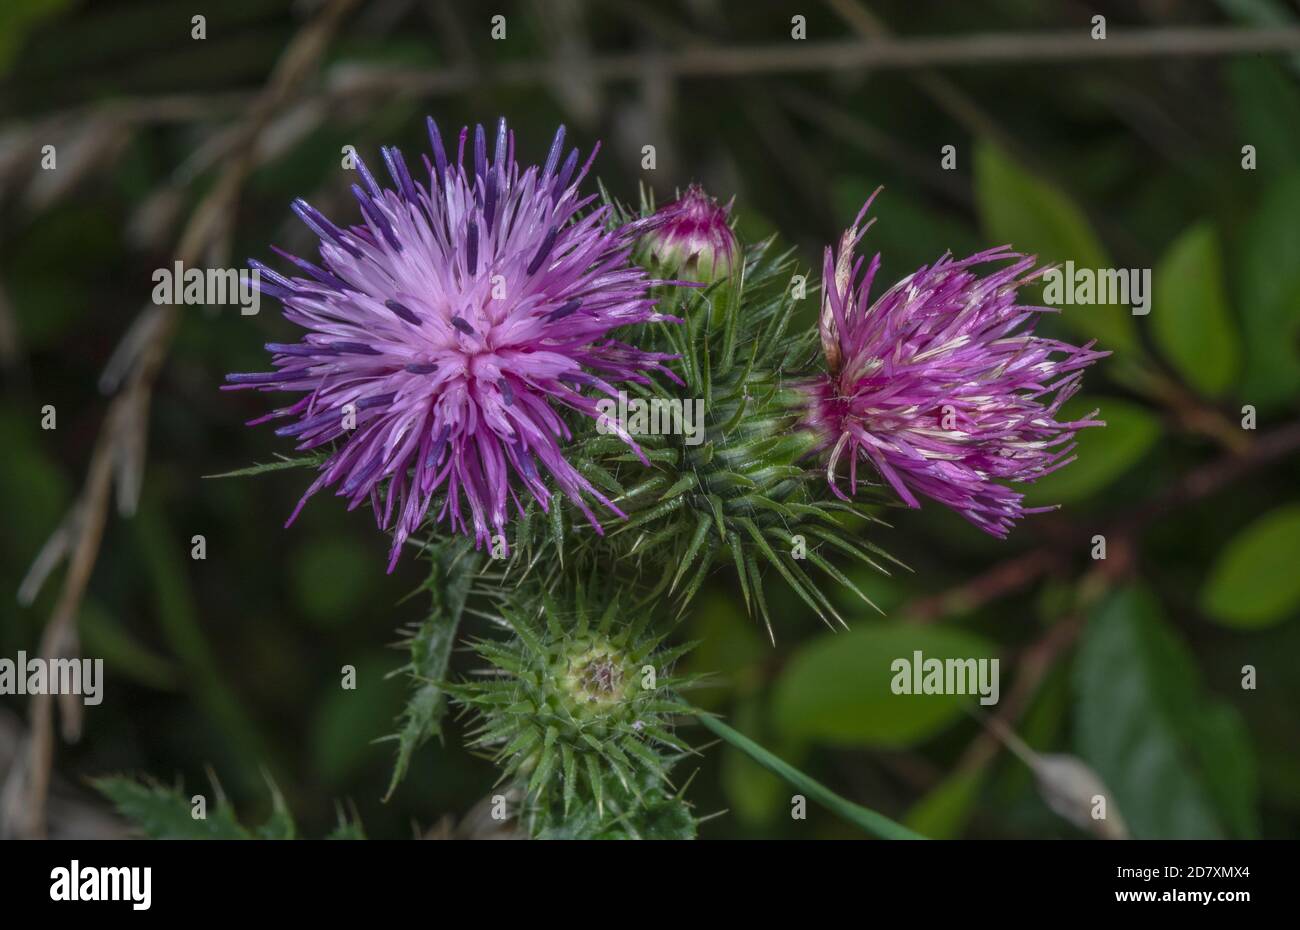 Flowers of Welted thistle, Carduus crispus, in woodland clearing. Stock Photo